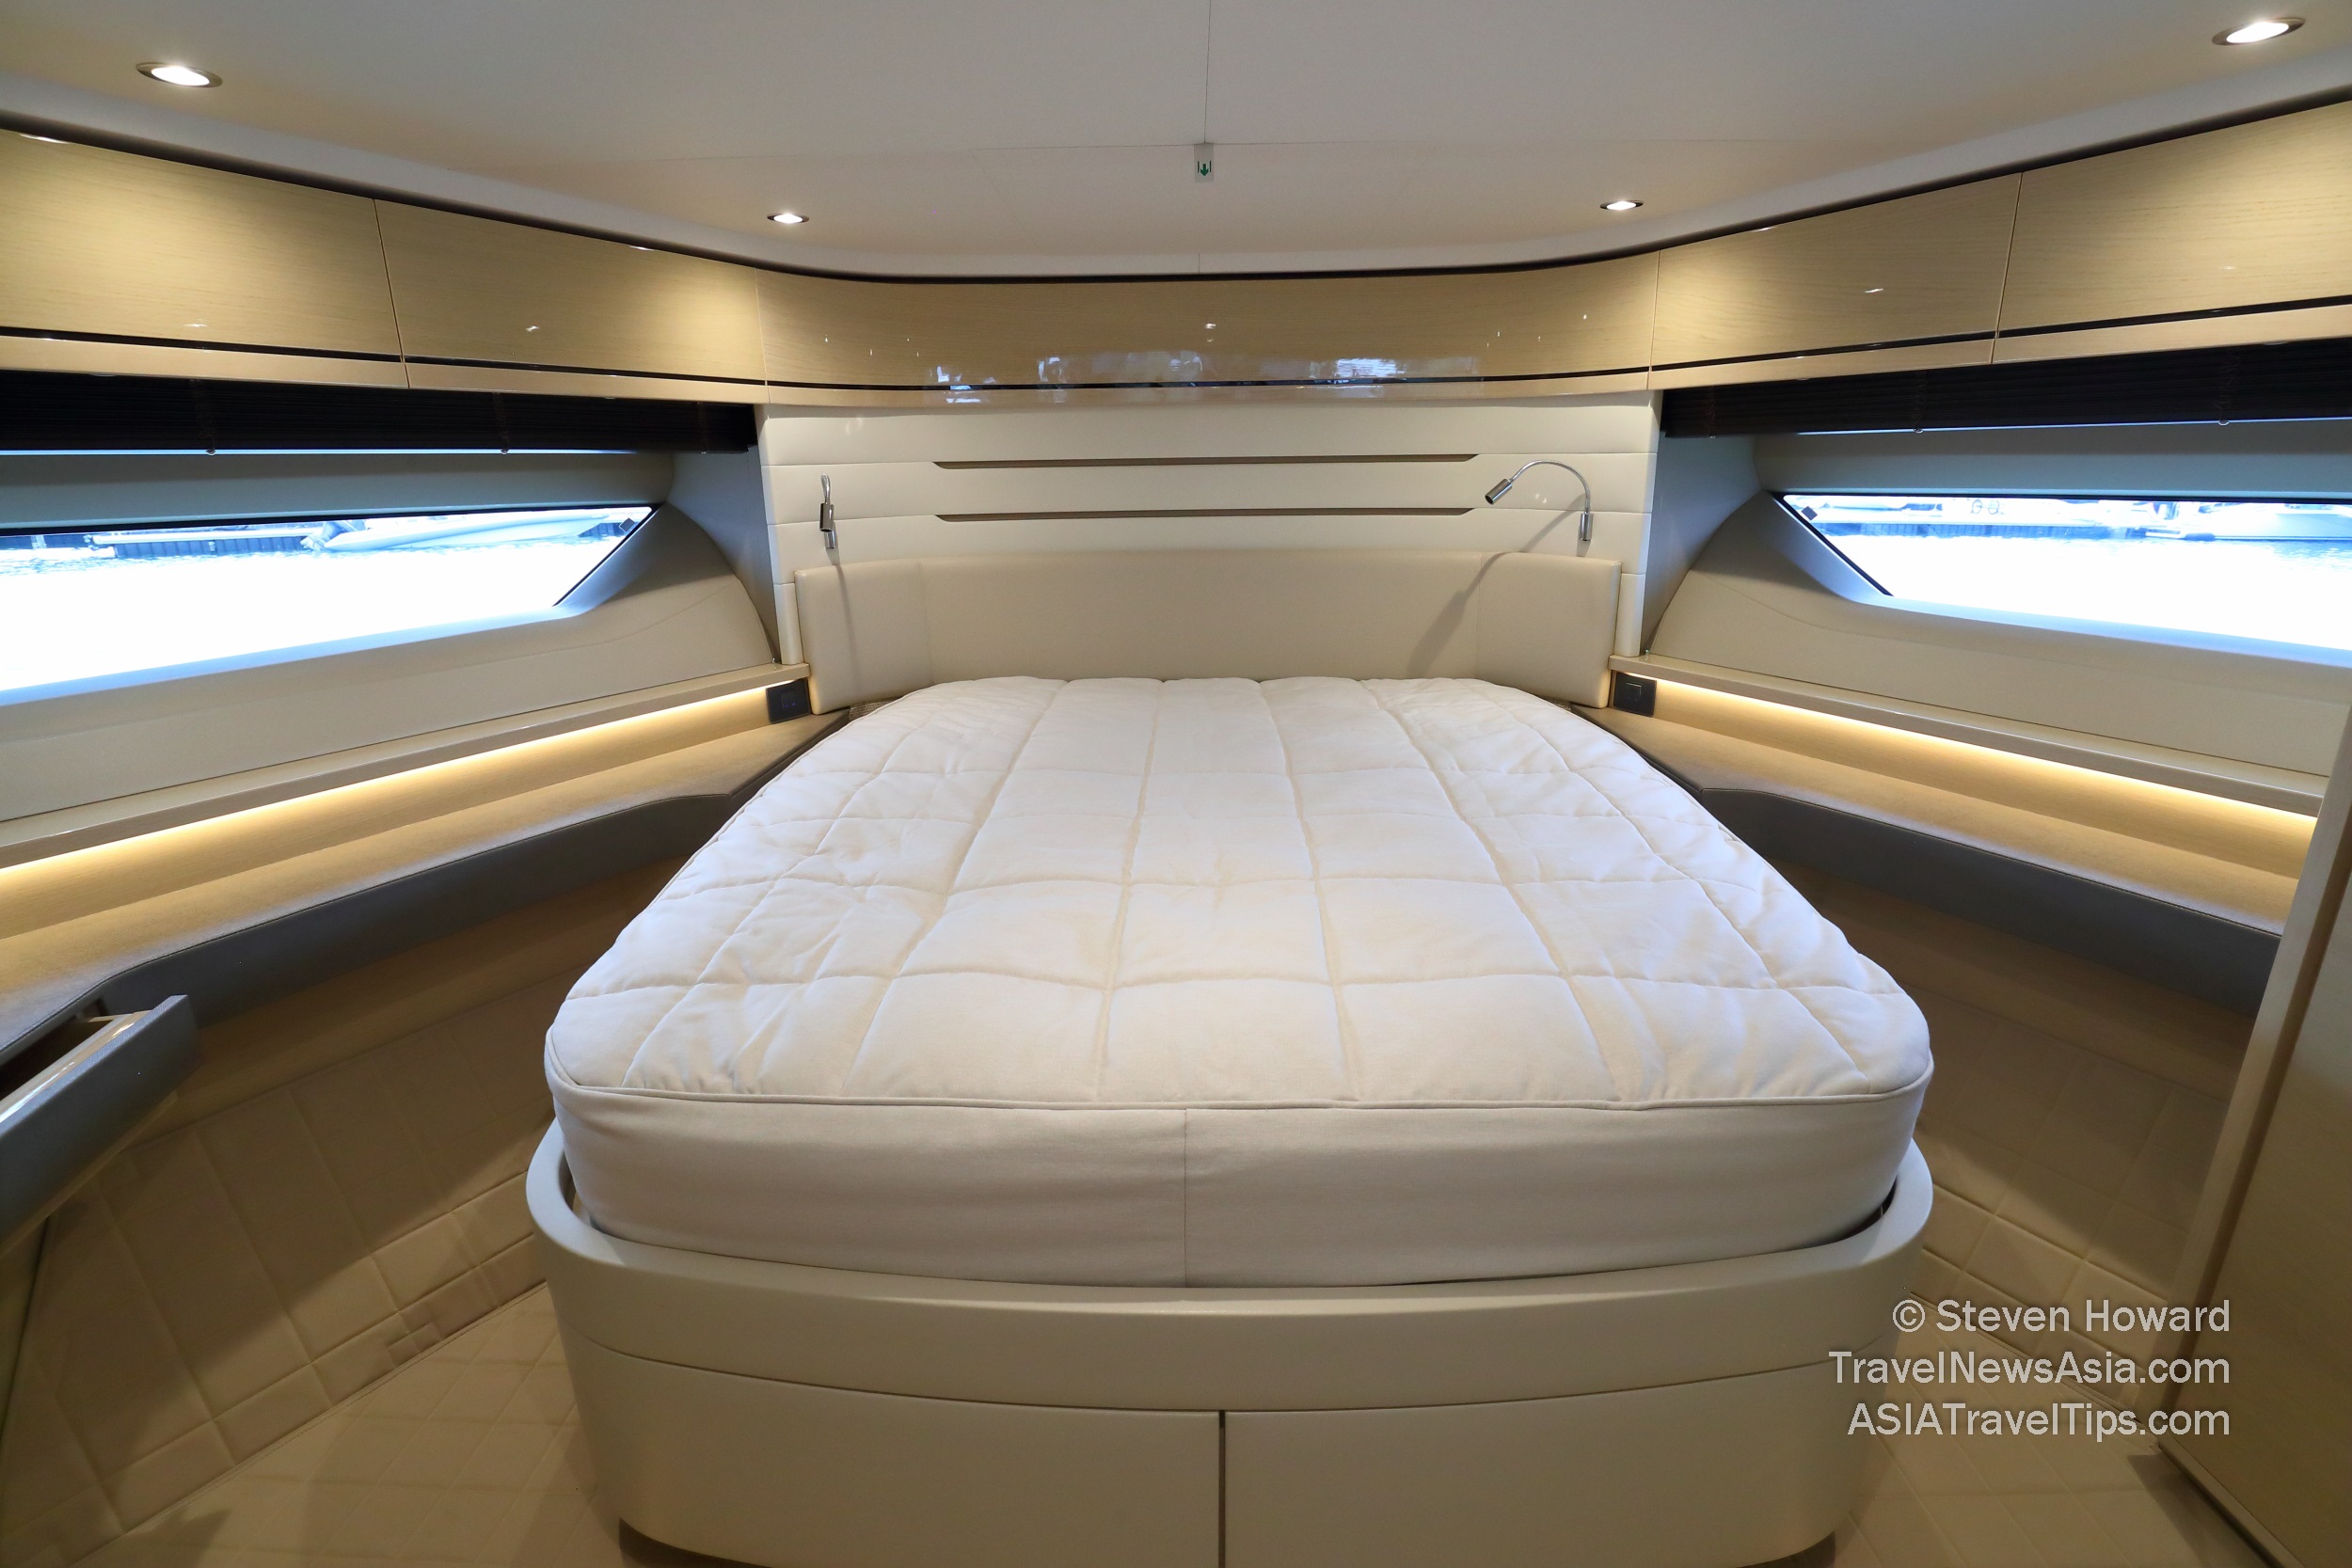 Luxurious bedroom on a luxury yacht in Thailand. Picture by Steven Howard of TravelNewsAsia.com Click to enlarge.